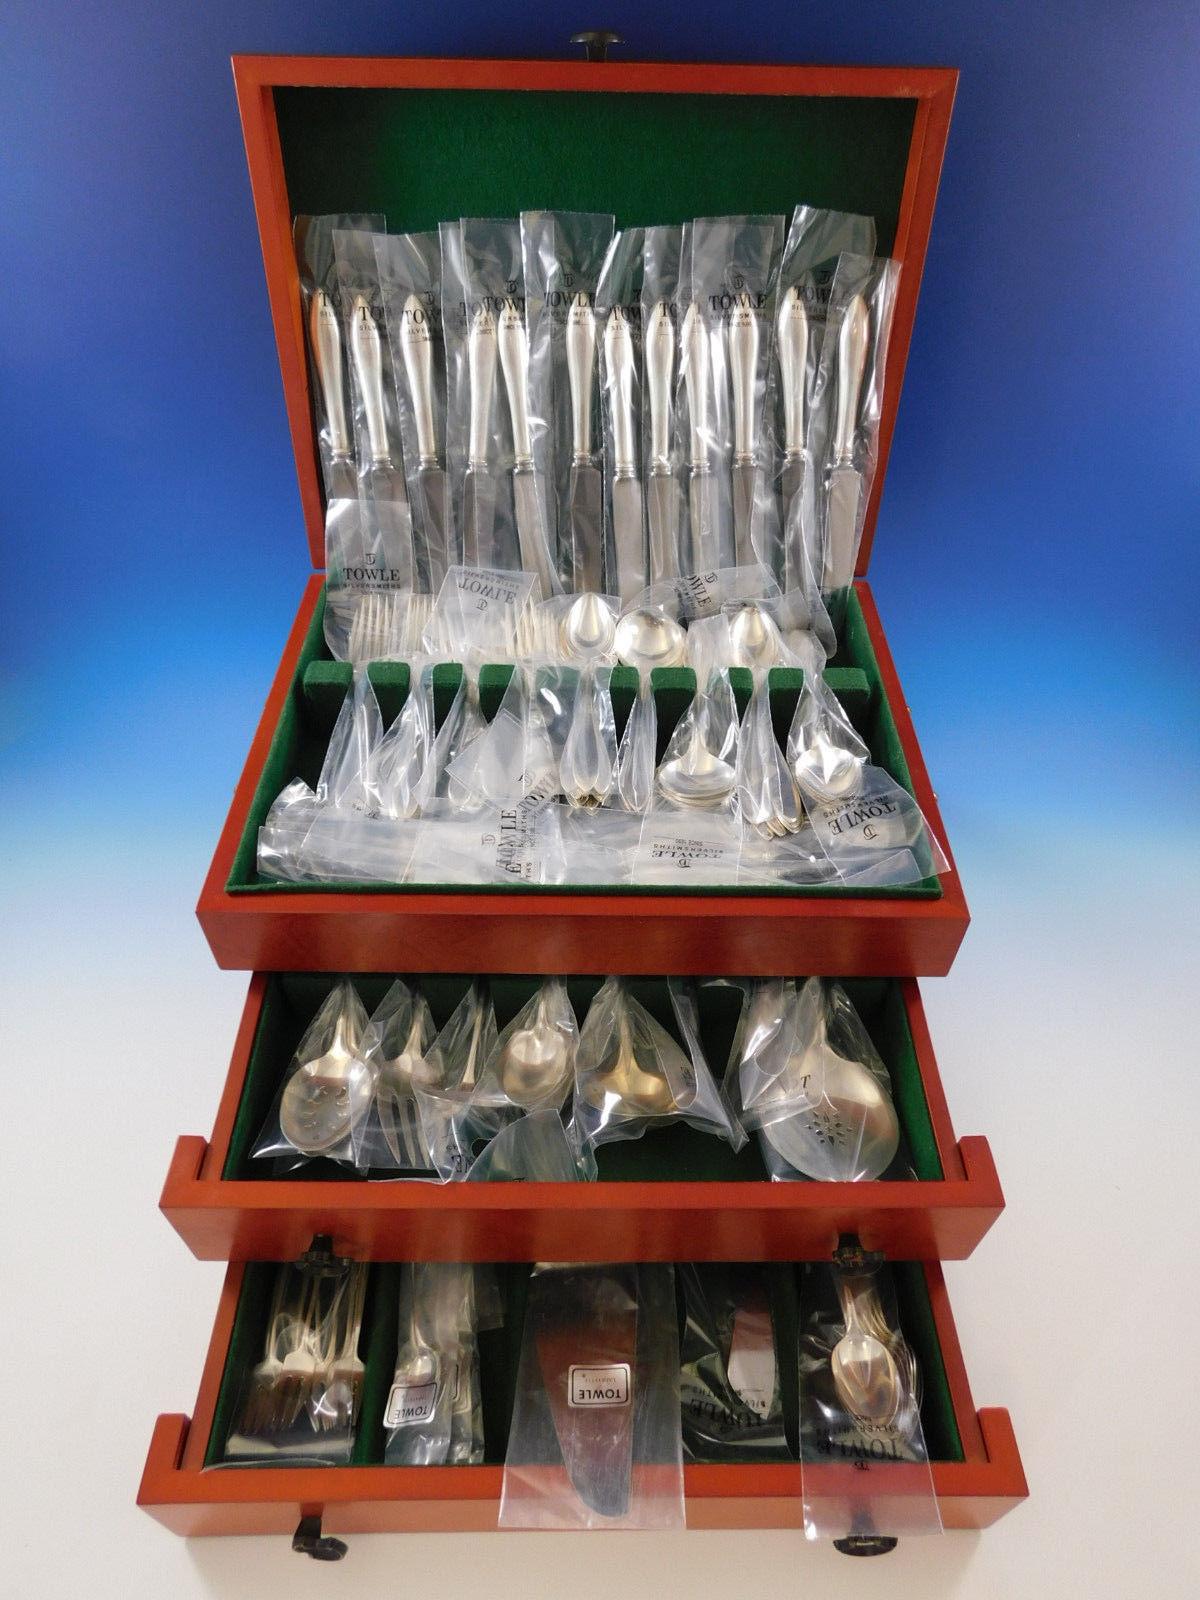 Superb unused Lafayette by Towle sterling silver flatware set, 133 pieces. This classic, timeless set includes:

12 knives, 8 7/8